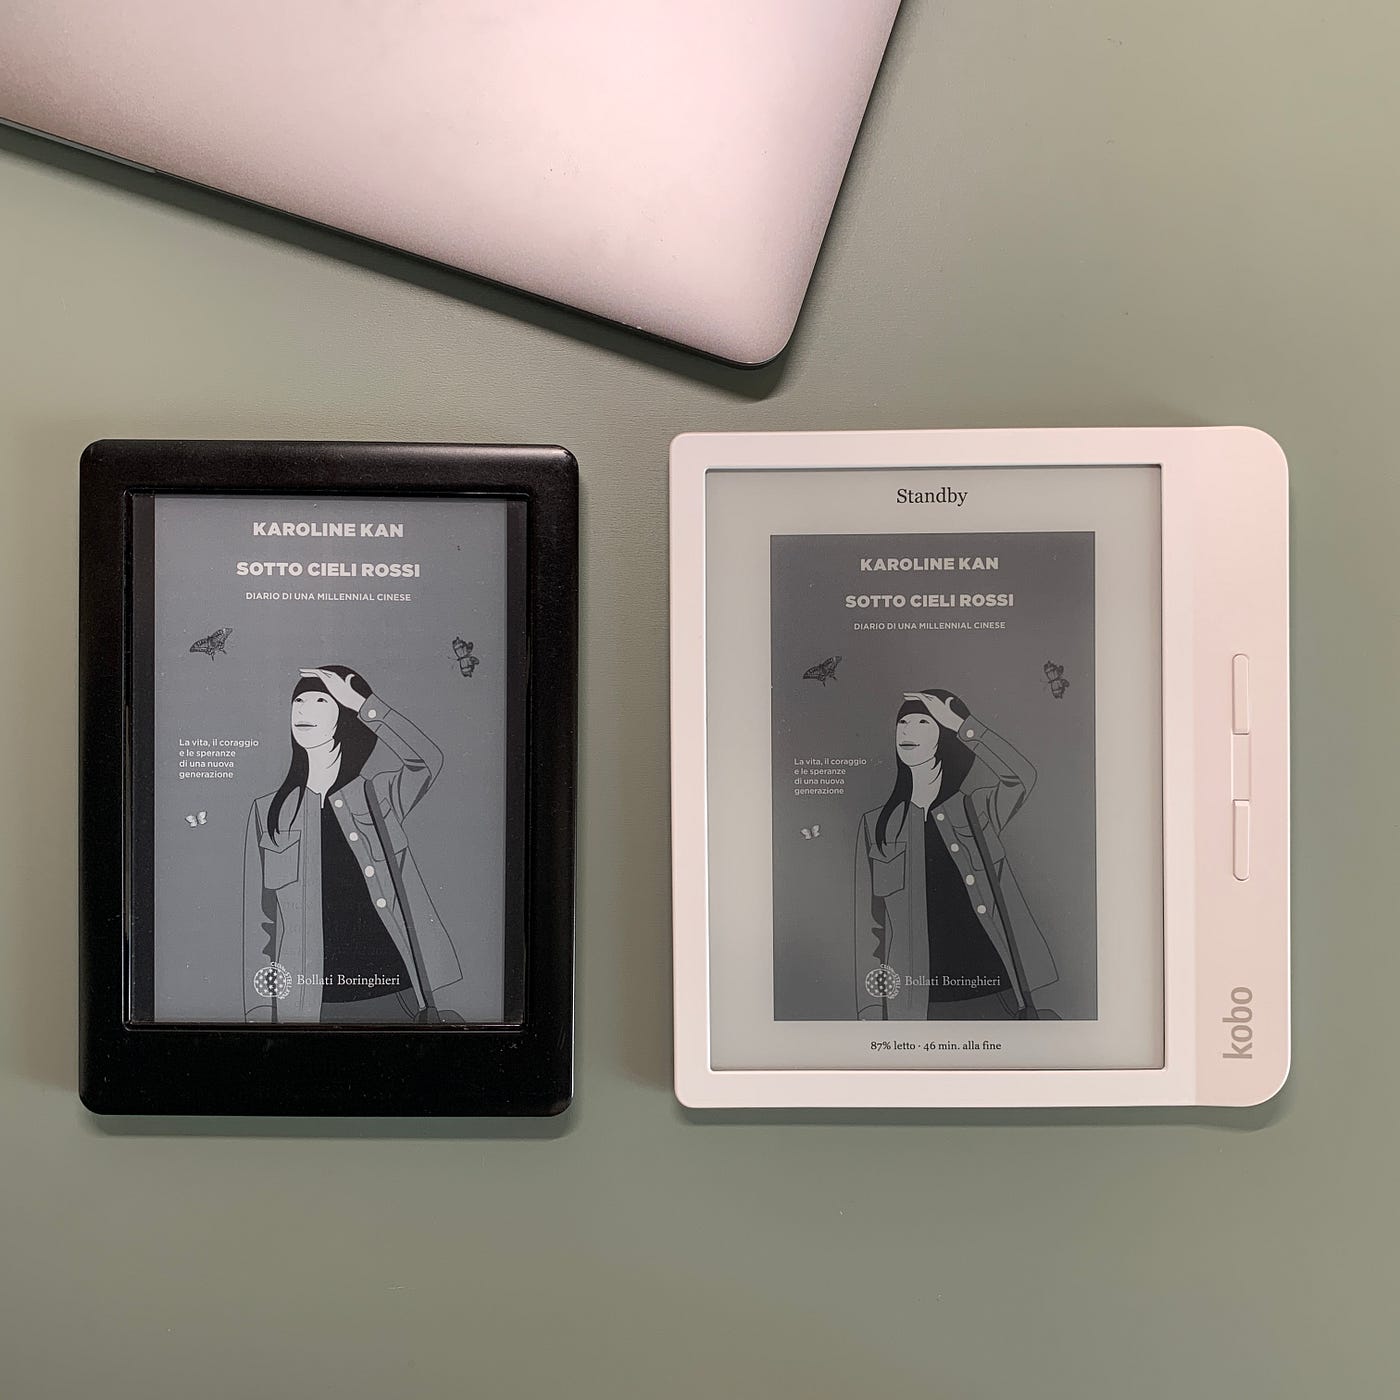 How I loved my Kobo Libra H2O and why I returned it, by Emanuele Forlano